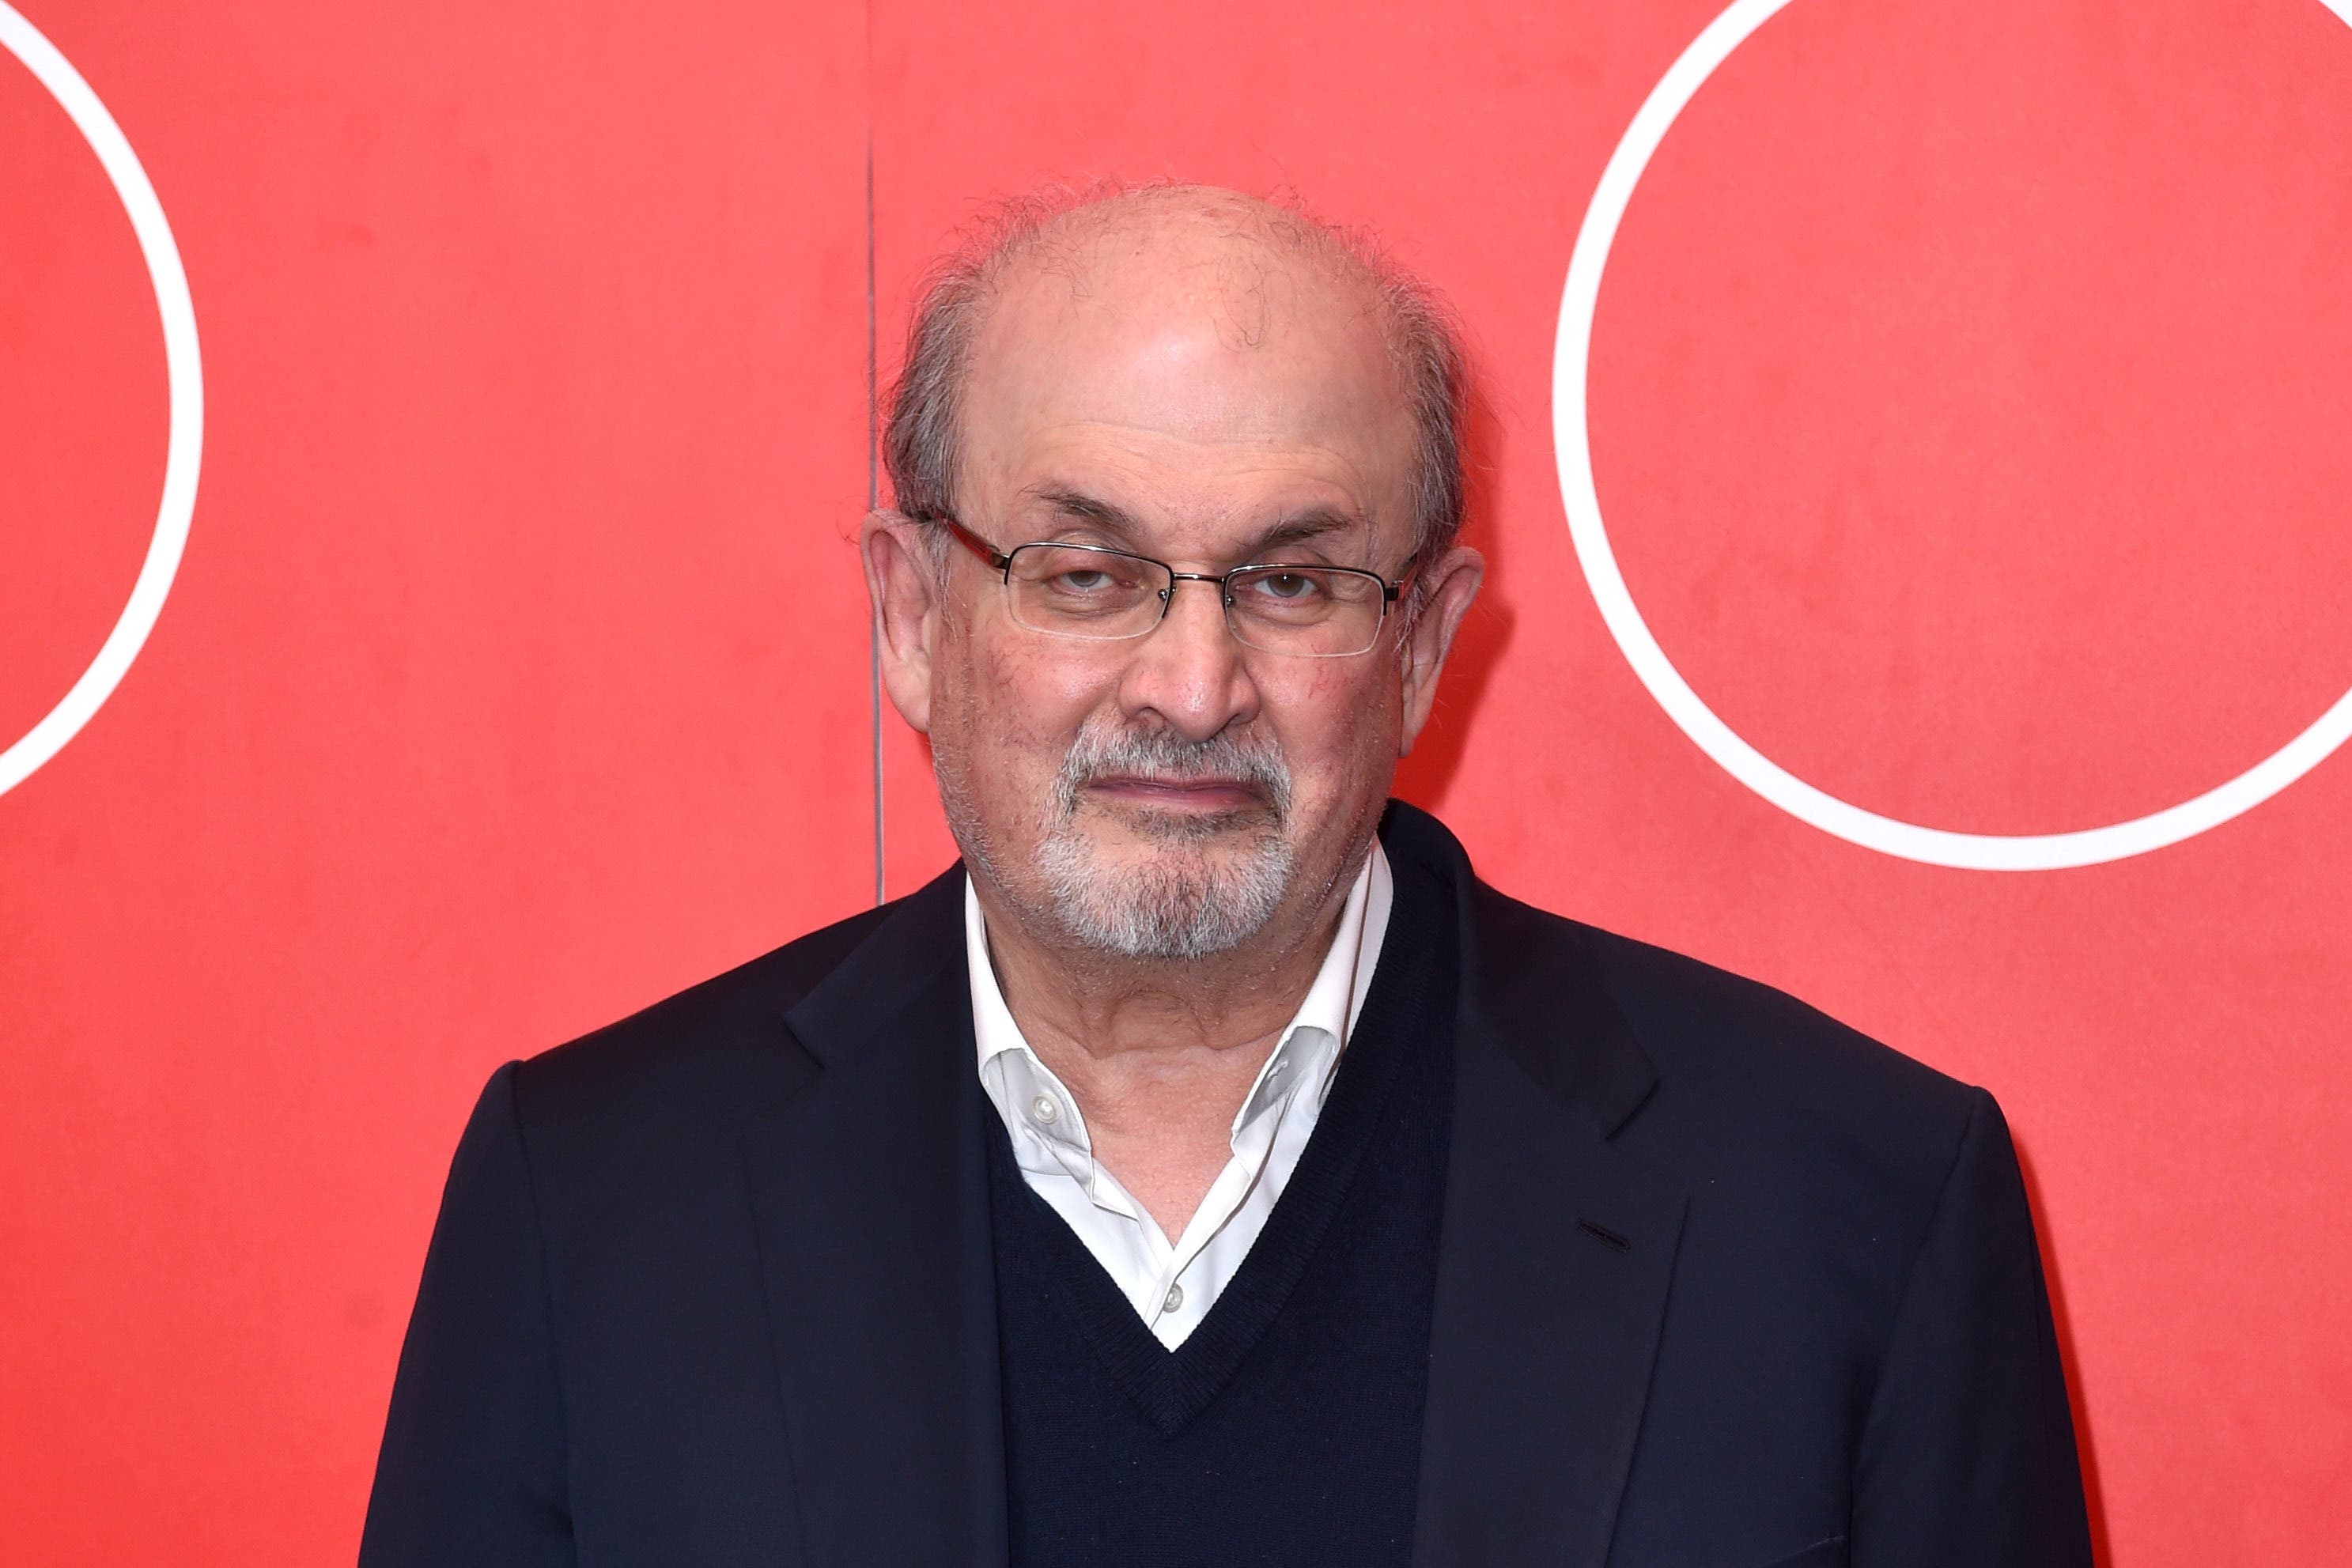 Trauma Salman Sex Videos - Sir Salman Rushdie feels 'gratitude' in first interview since attack last  year | The Independent